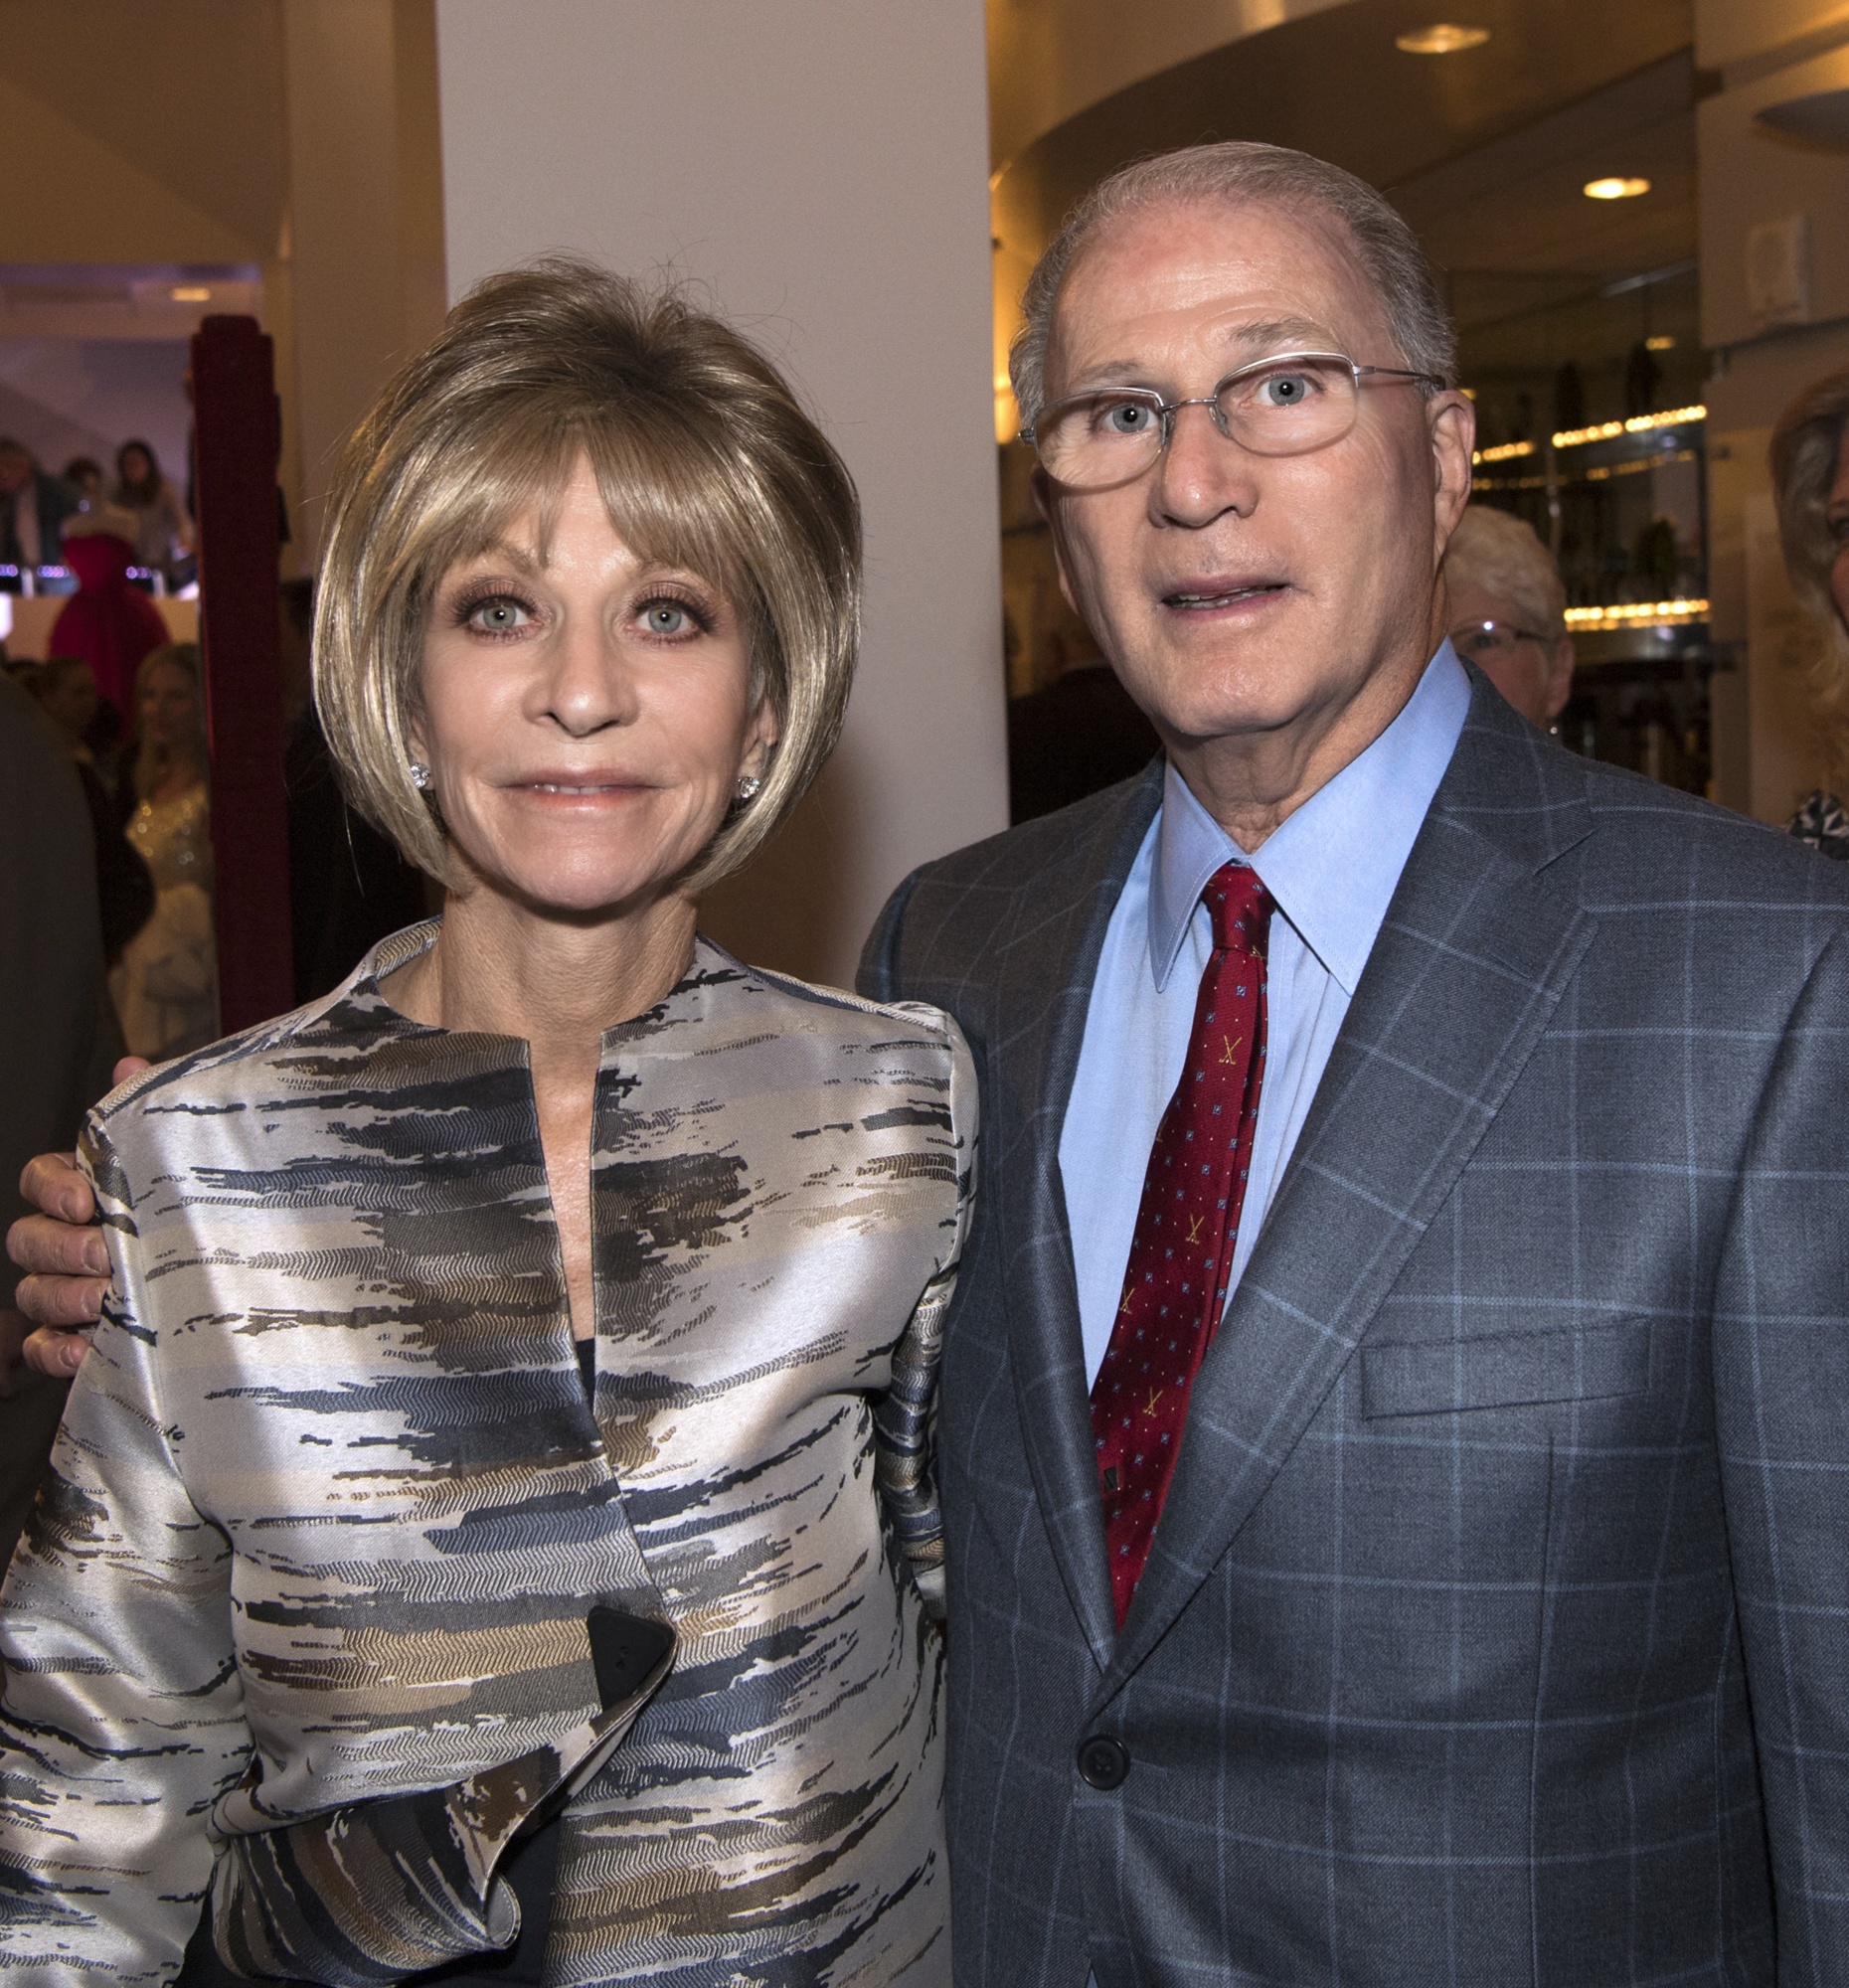 Larry and Debbie Haspel were announced as new members (along with Herman and Sharon Frankel) of the  Asolo Repertory Theatre's Crystal Society on March 17 at the opening night dinner for 